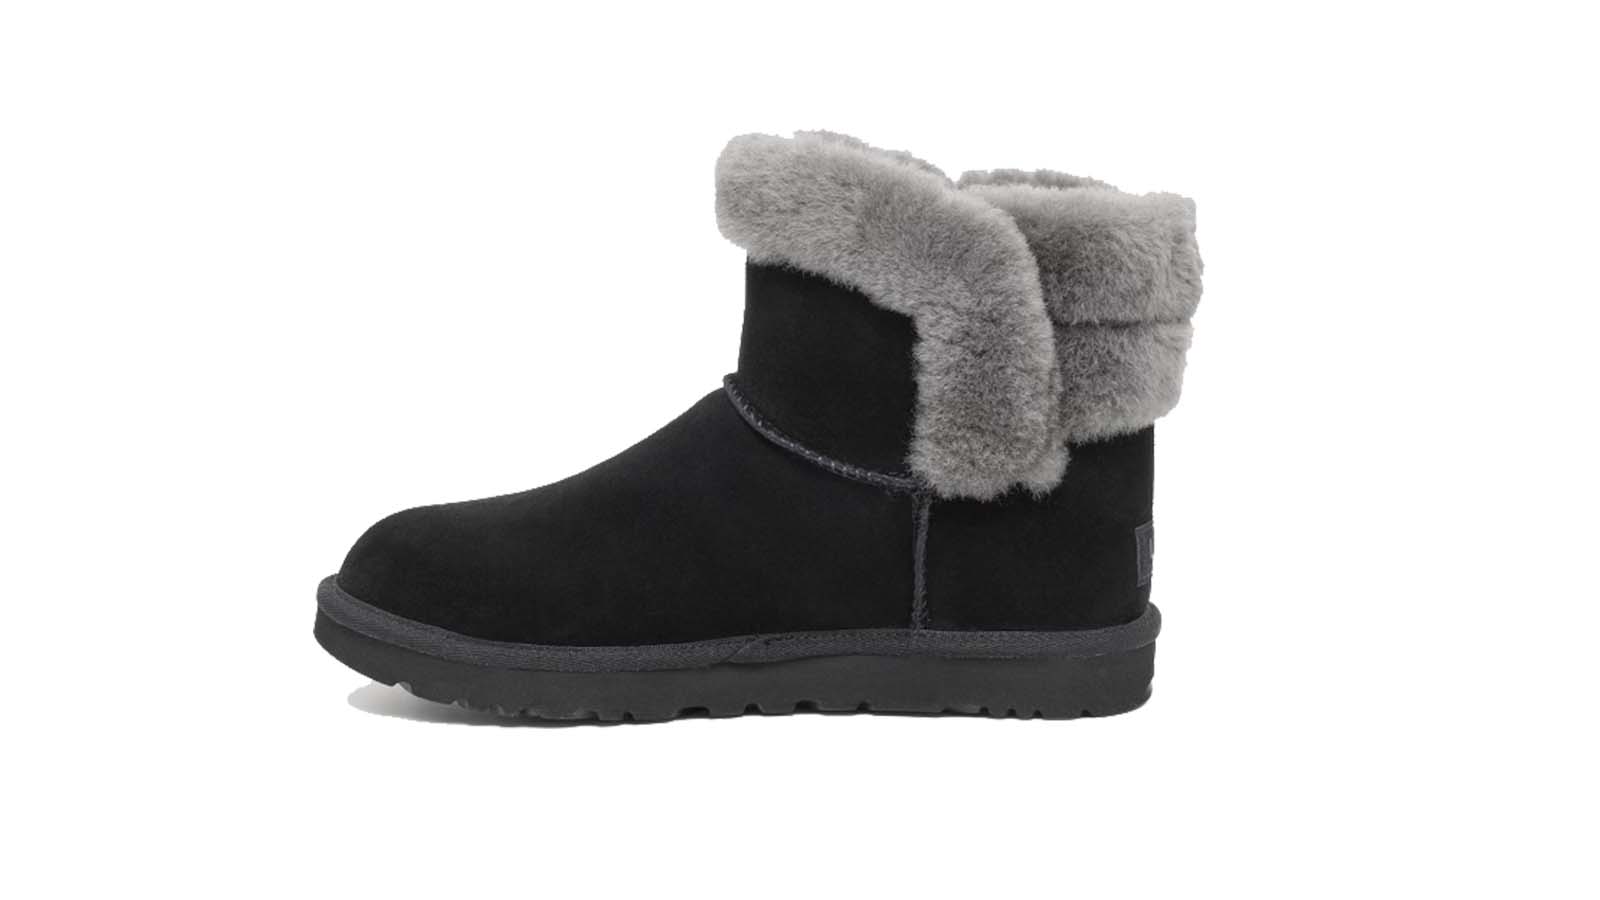 SET YOUR ALARMS 8AM PST!!!! You guys have sold us out TWICE and this i, ugg mini sherpa boots